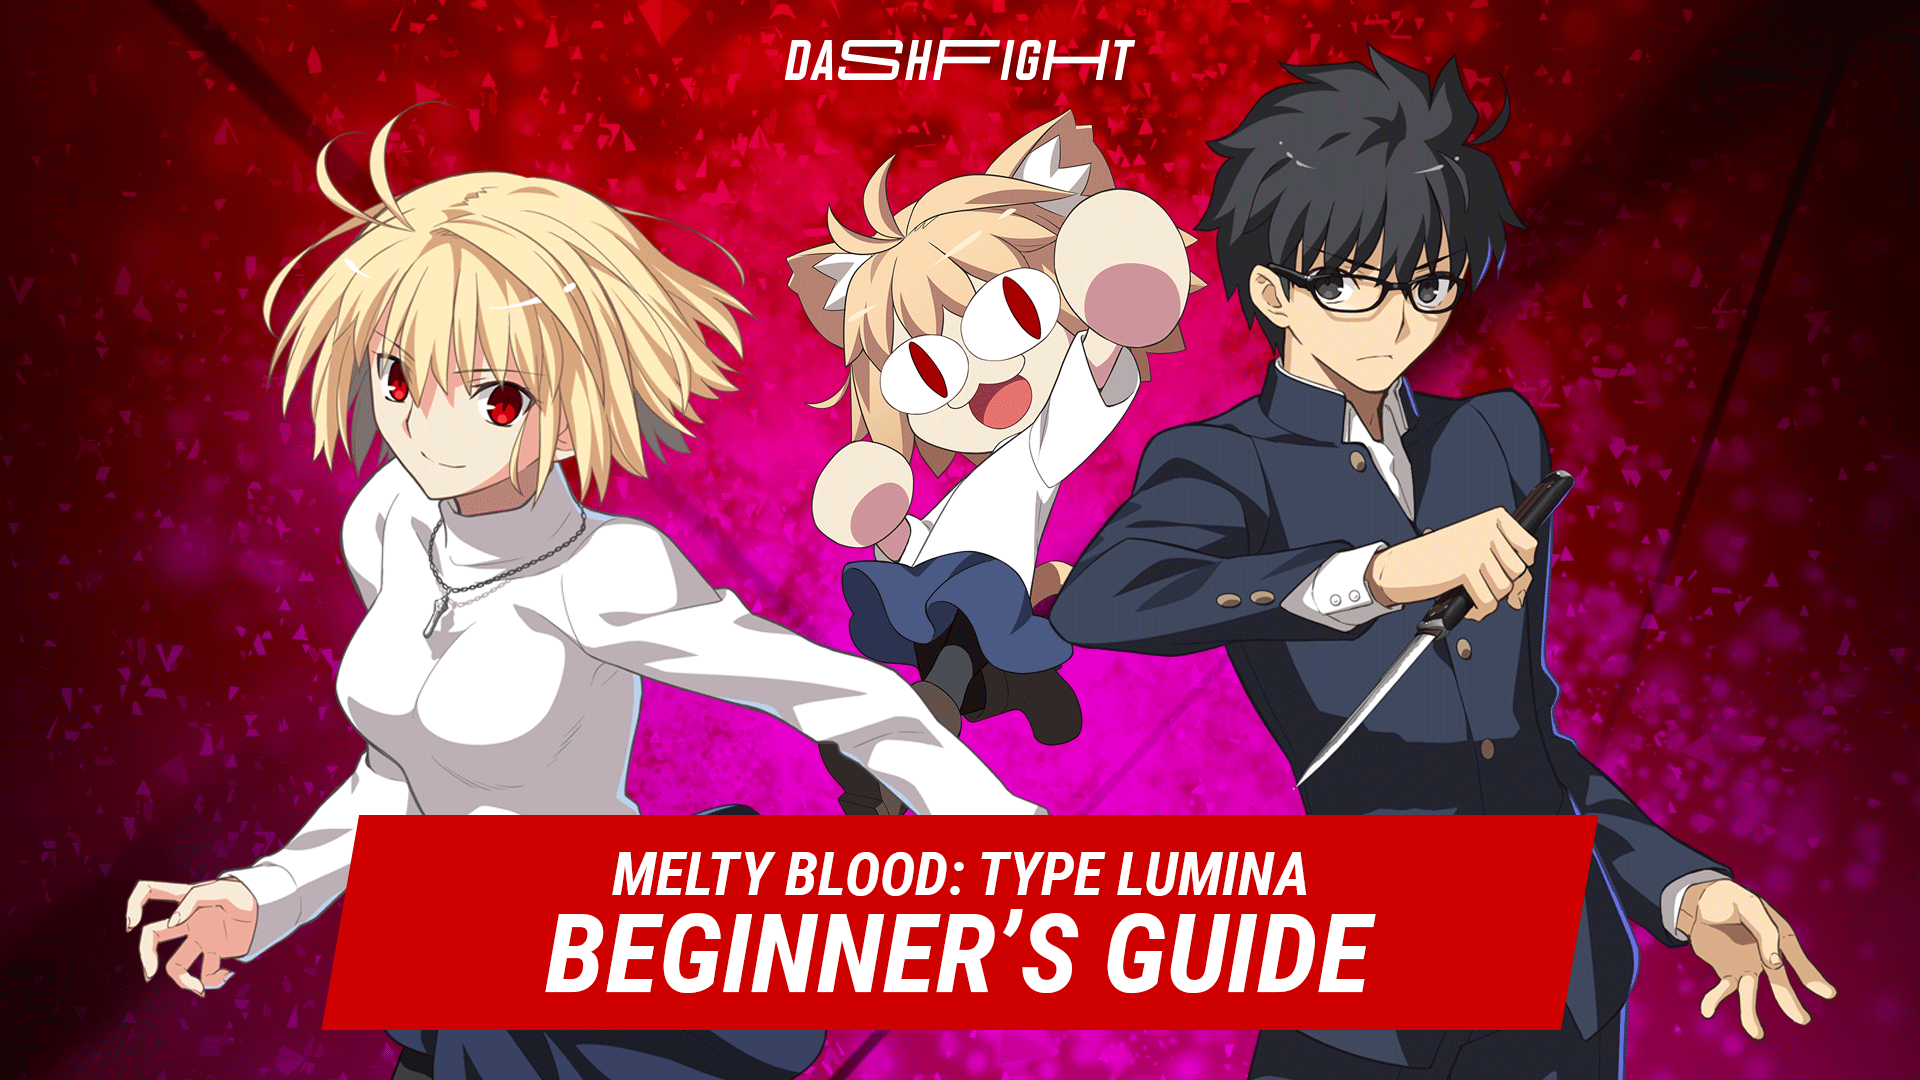 A Beginner’s Guide to Melty Blood: Type Lumina